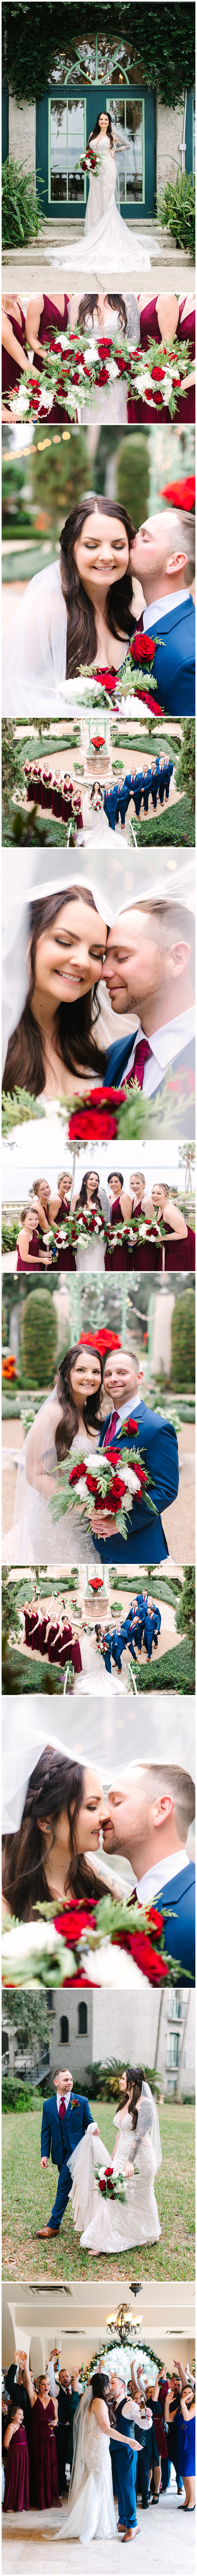 A collage of photos of a holiday wedding at Club Continental in Orange Park, FL.  Newlyweds kiss surrounded by their wedding party following an emotional wedding ceremony. 